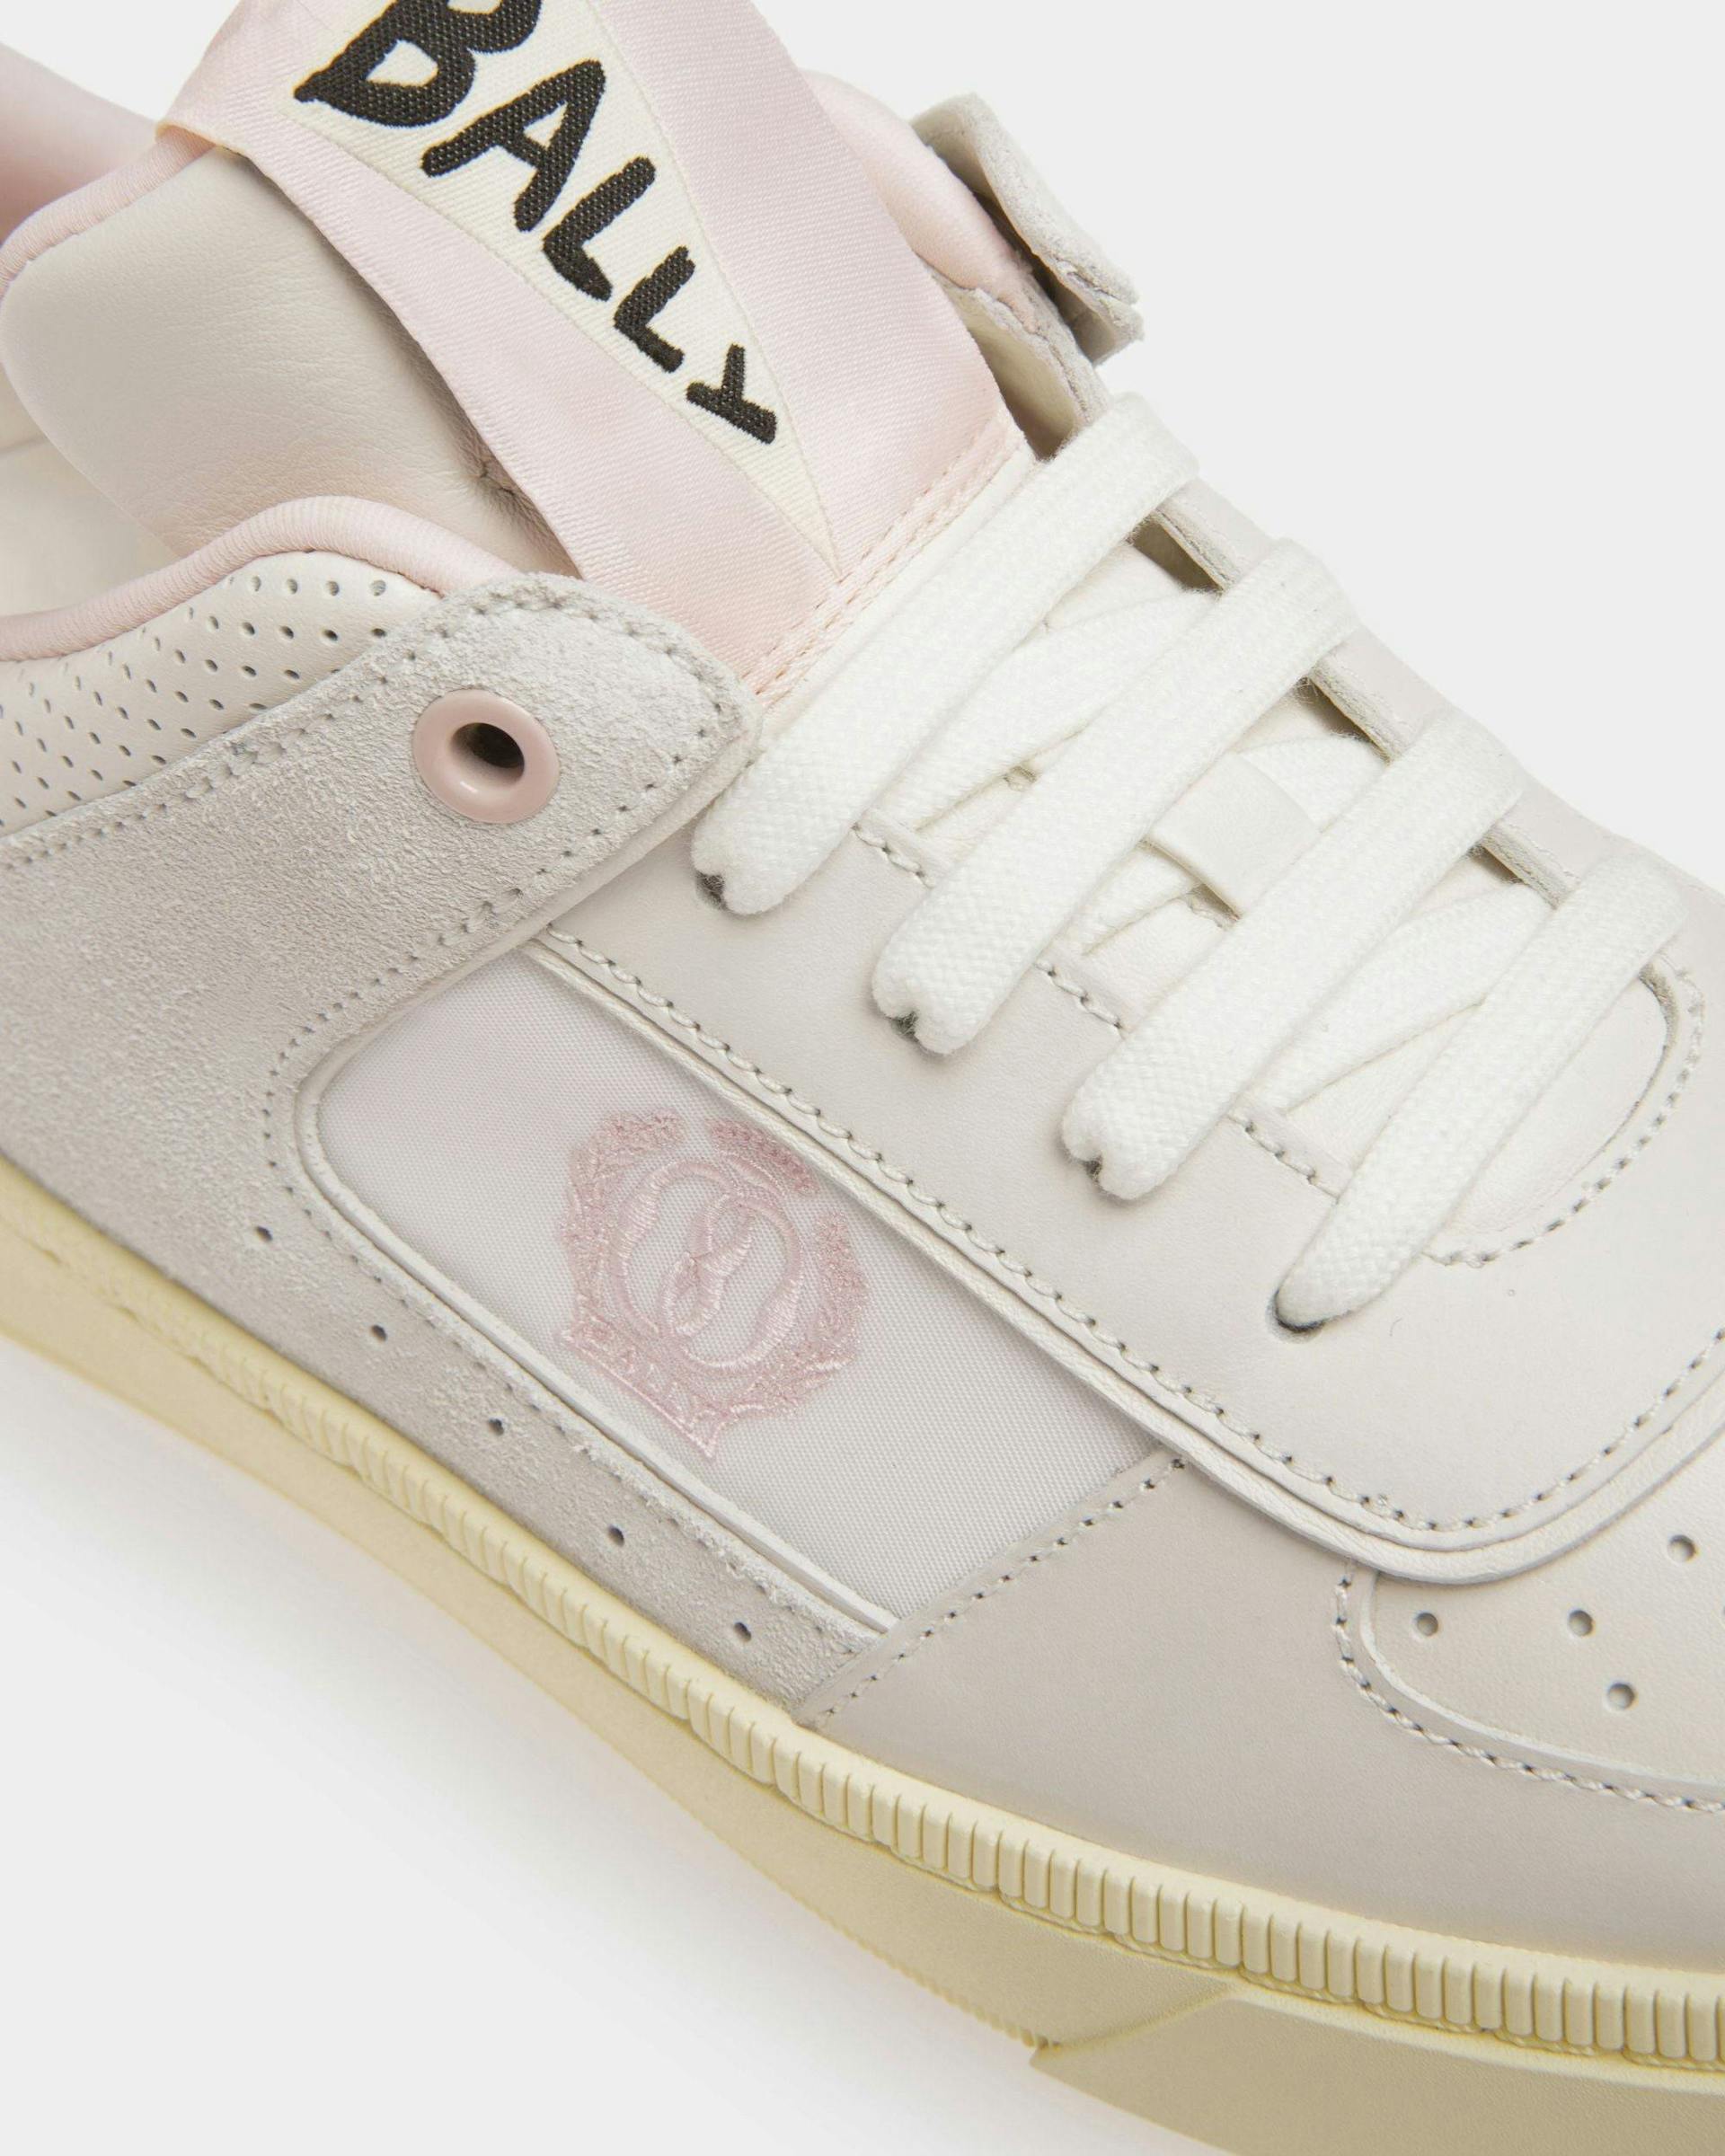 Raise Sneakers In White And Pink Leather - Women's - Bally - 05